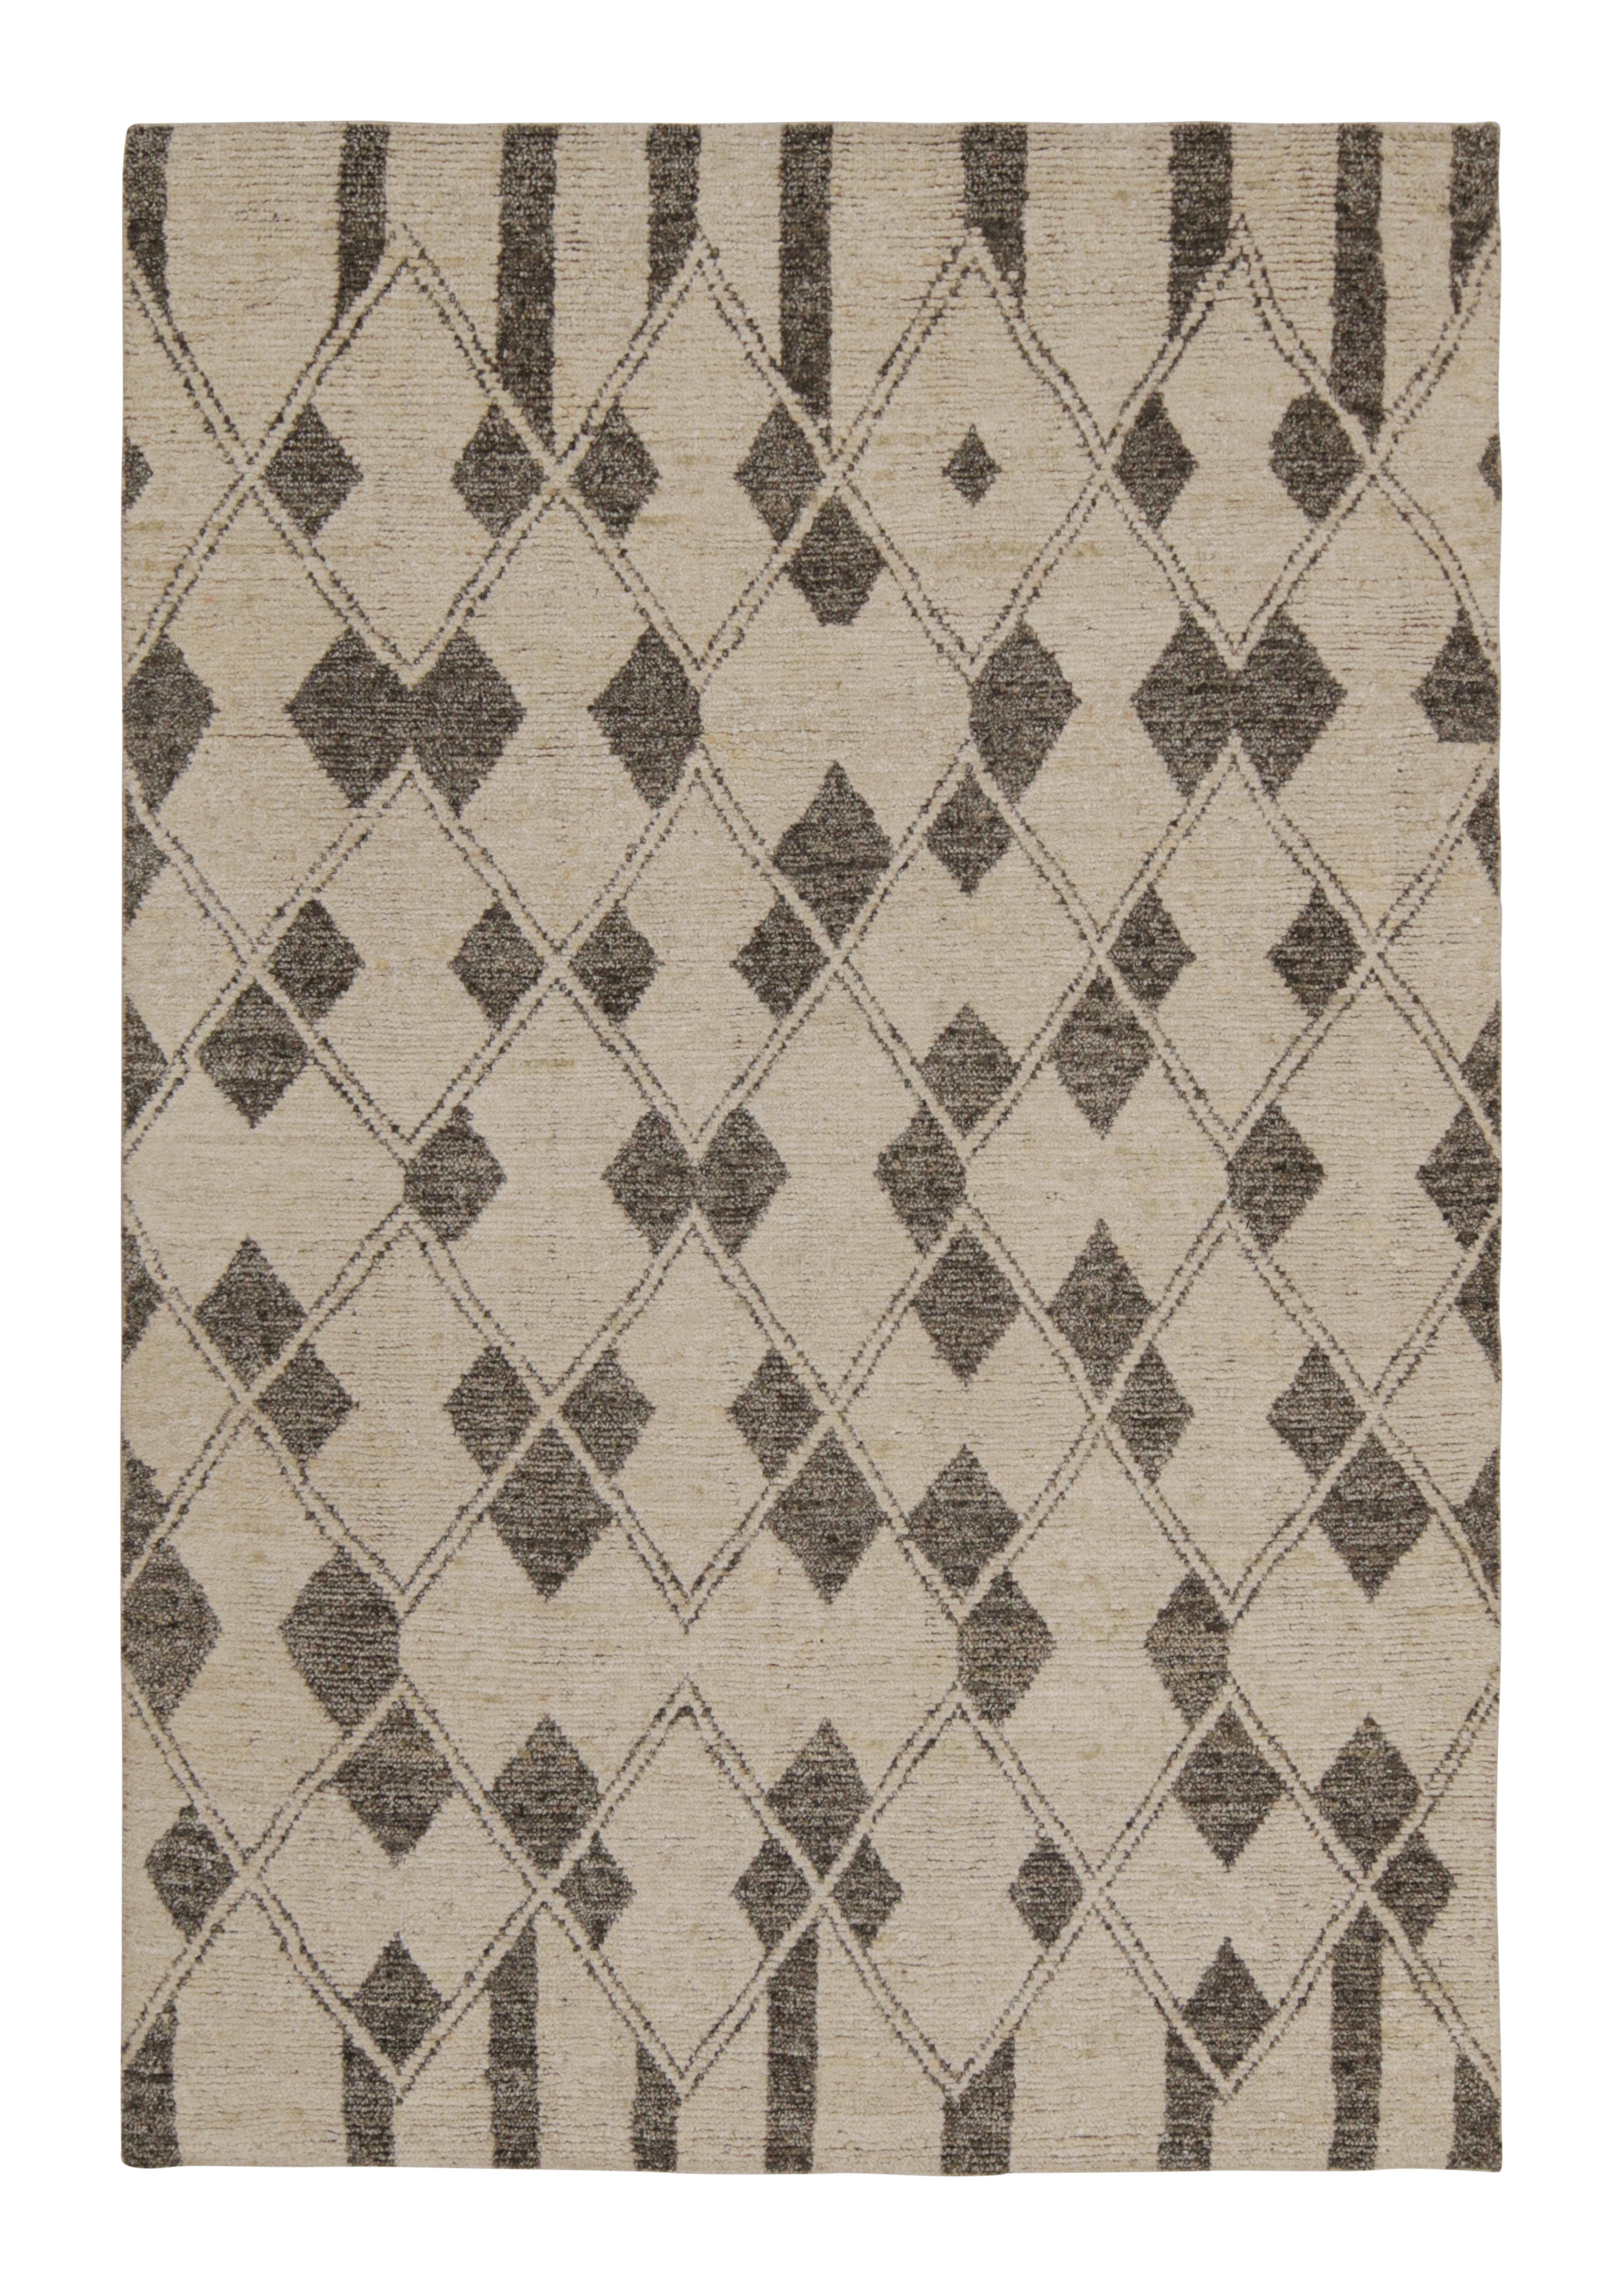 Rug & Kilim’s Moroccan Style Rug in Beige with Gray Diamond Patterns